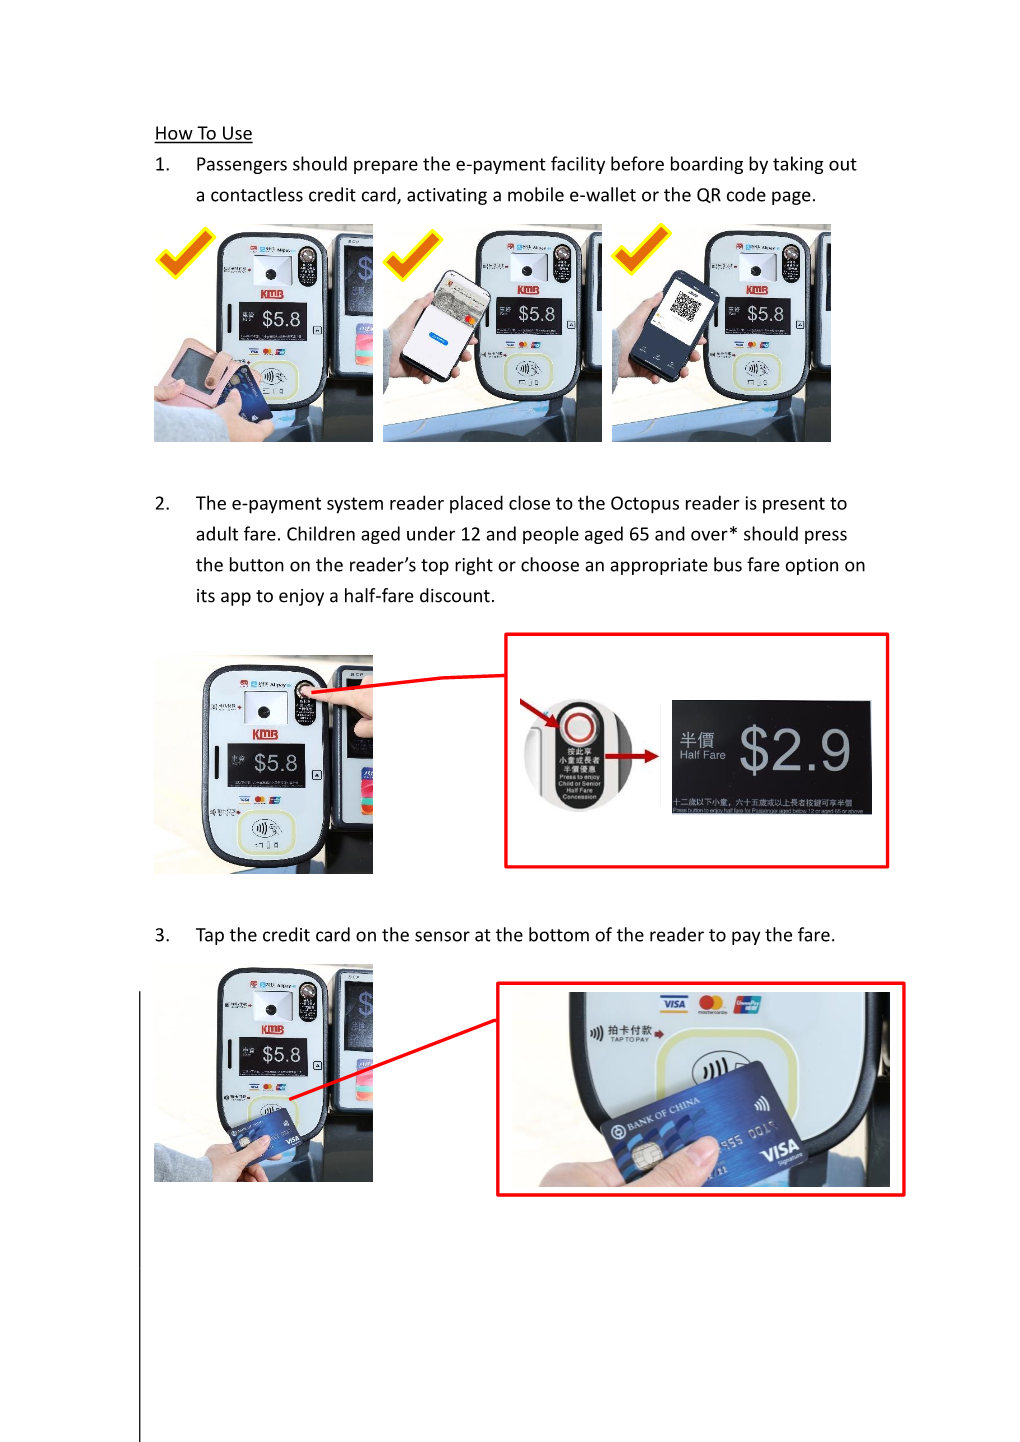 How to Use 1. Passengers Should Prepare the E-Payment Facility